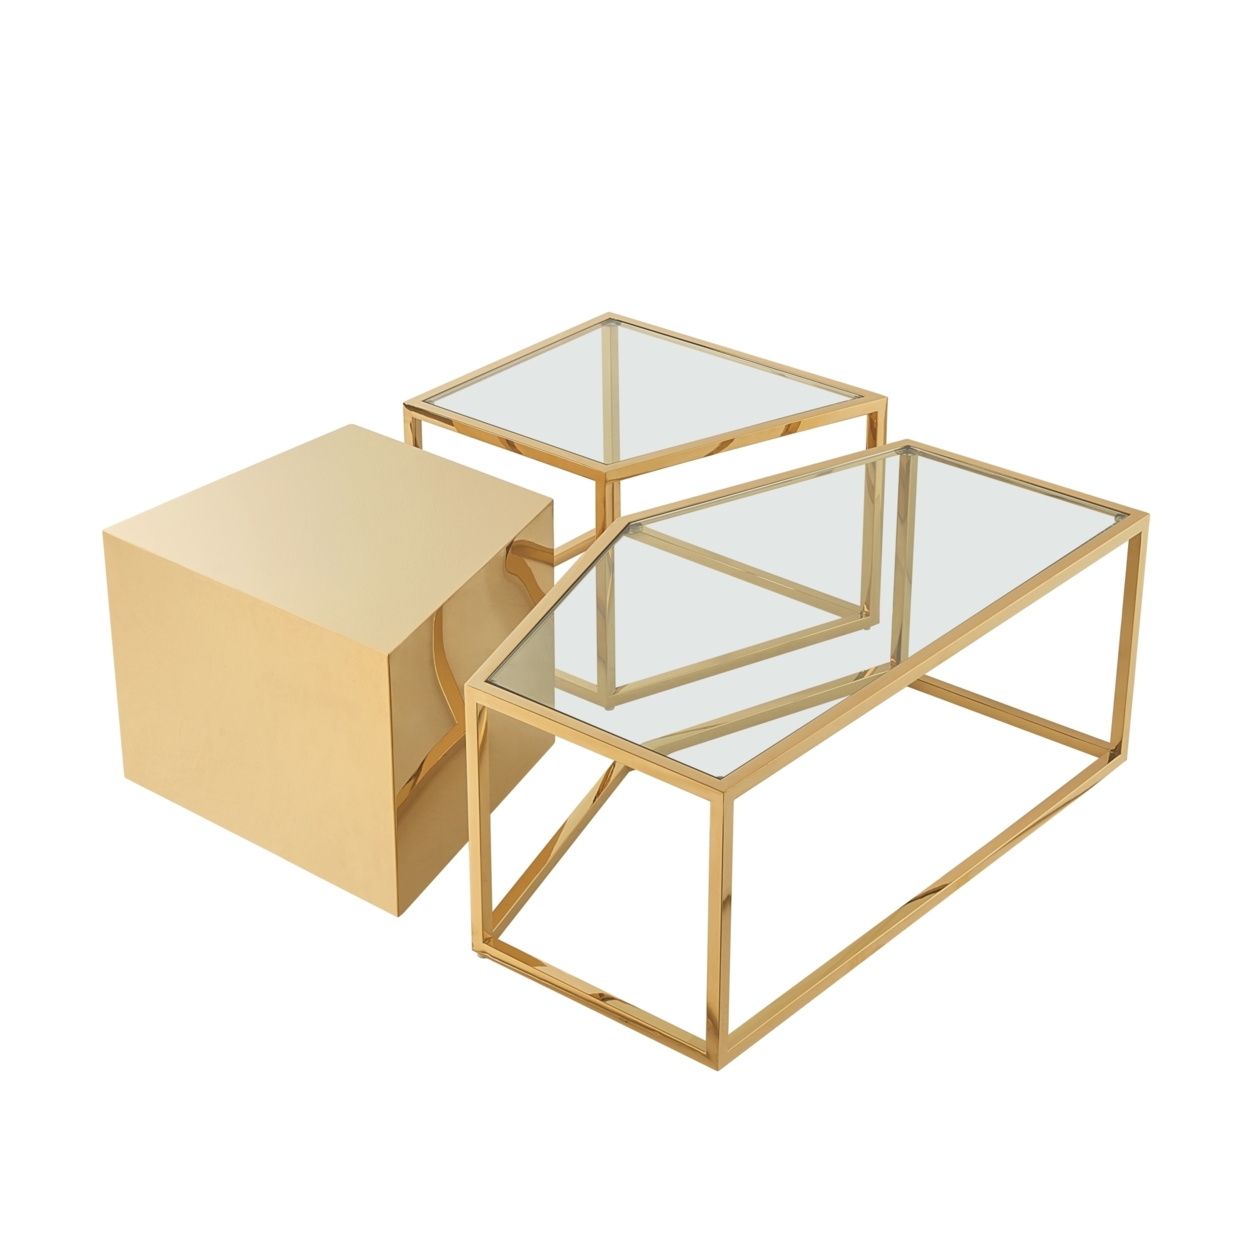 Cailin Table - 3 Pieces, Metal Open Frame, Glass Top - Gold